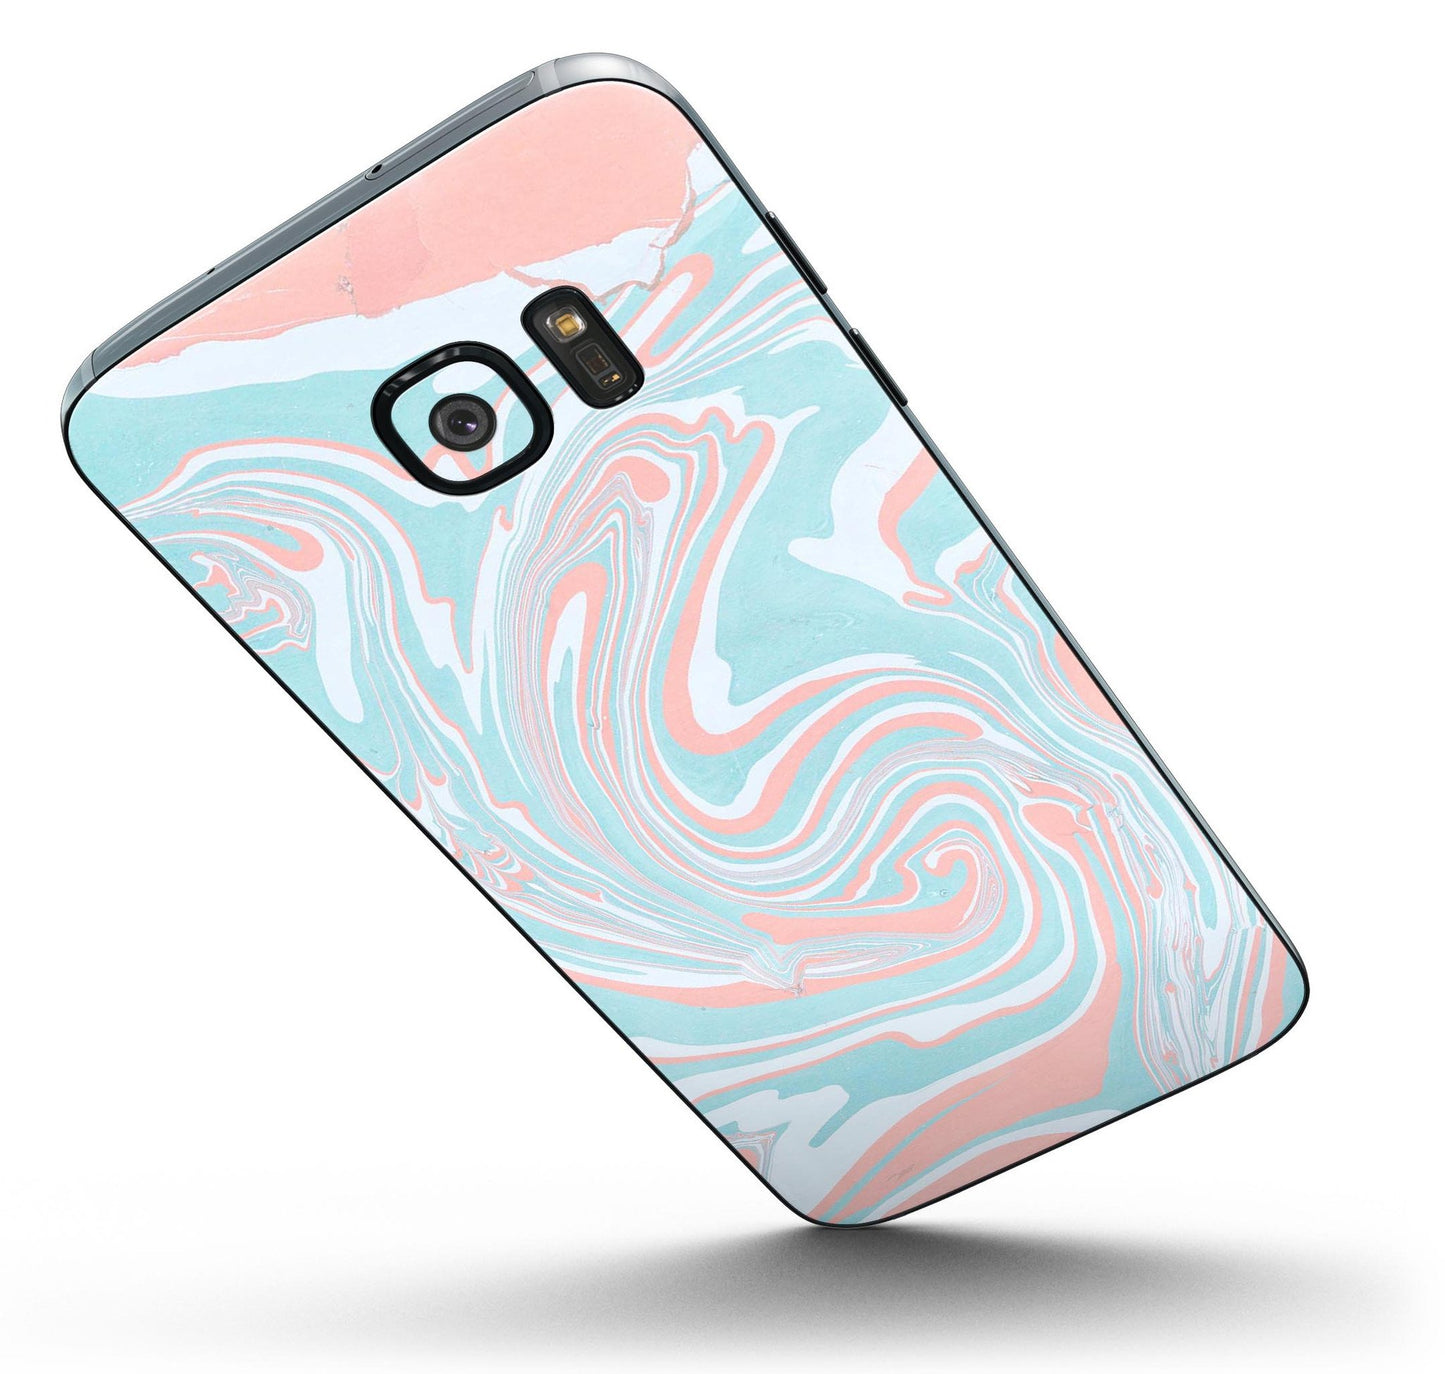 Marbleized Mint and Coral - Full Body Skin-Kit for the Samsung Galaxy